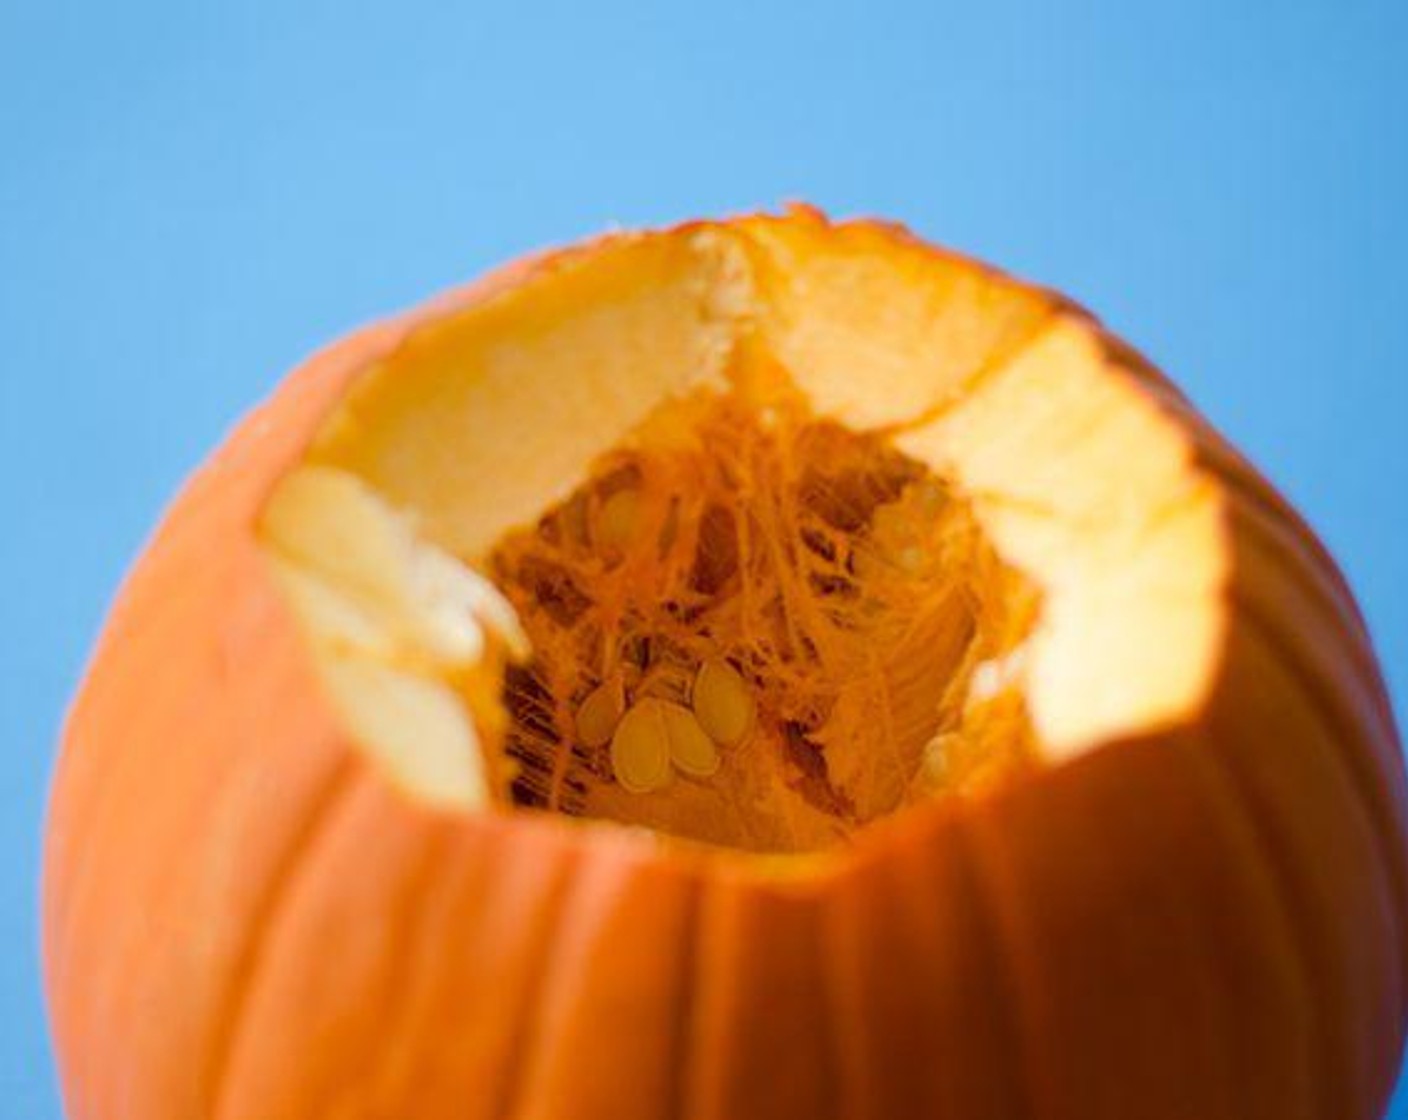 step 1 For small pumpkins, chop off top, cut in half, and remove seeds. For larger pumpkins, cut around stem, remove seeds, and cut 4 inch-ish wide pieces down along the natural grooves. Gently scrape the inside with a spoon to remove the stringy gunk.